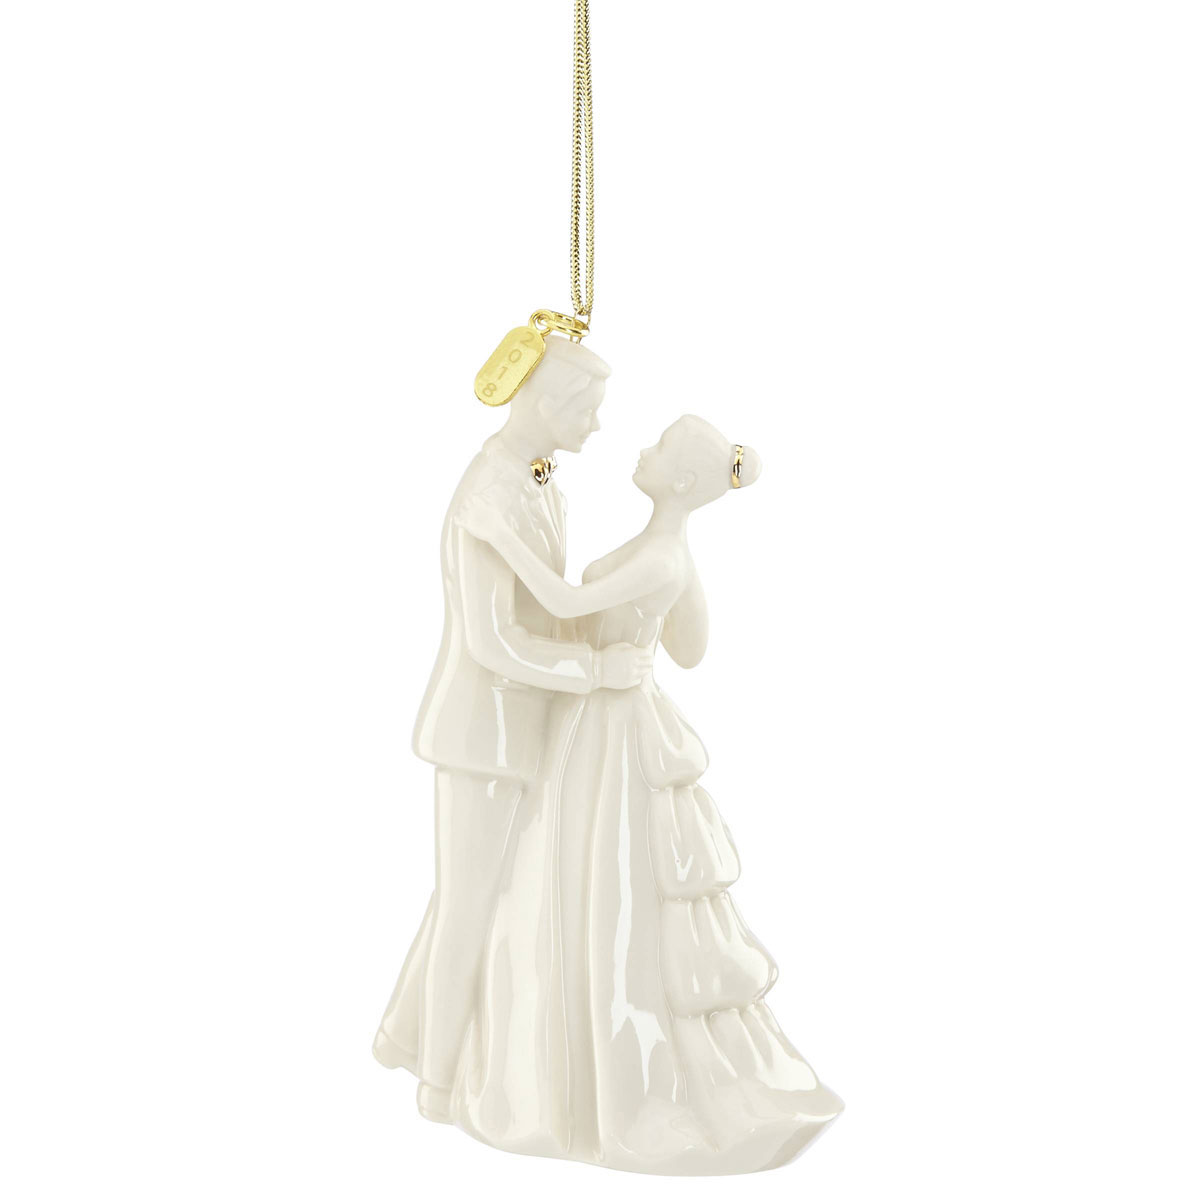 Lenox 2018 Always and Forever Bride and Groom Christmas Ornament